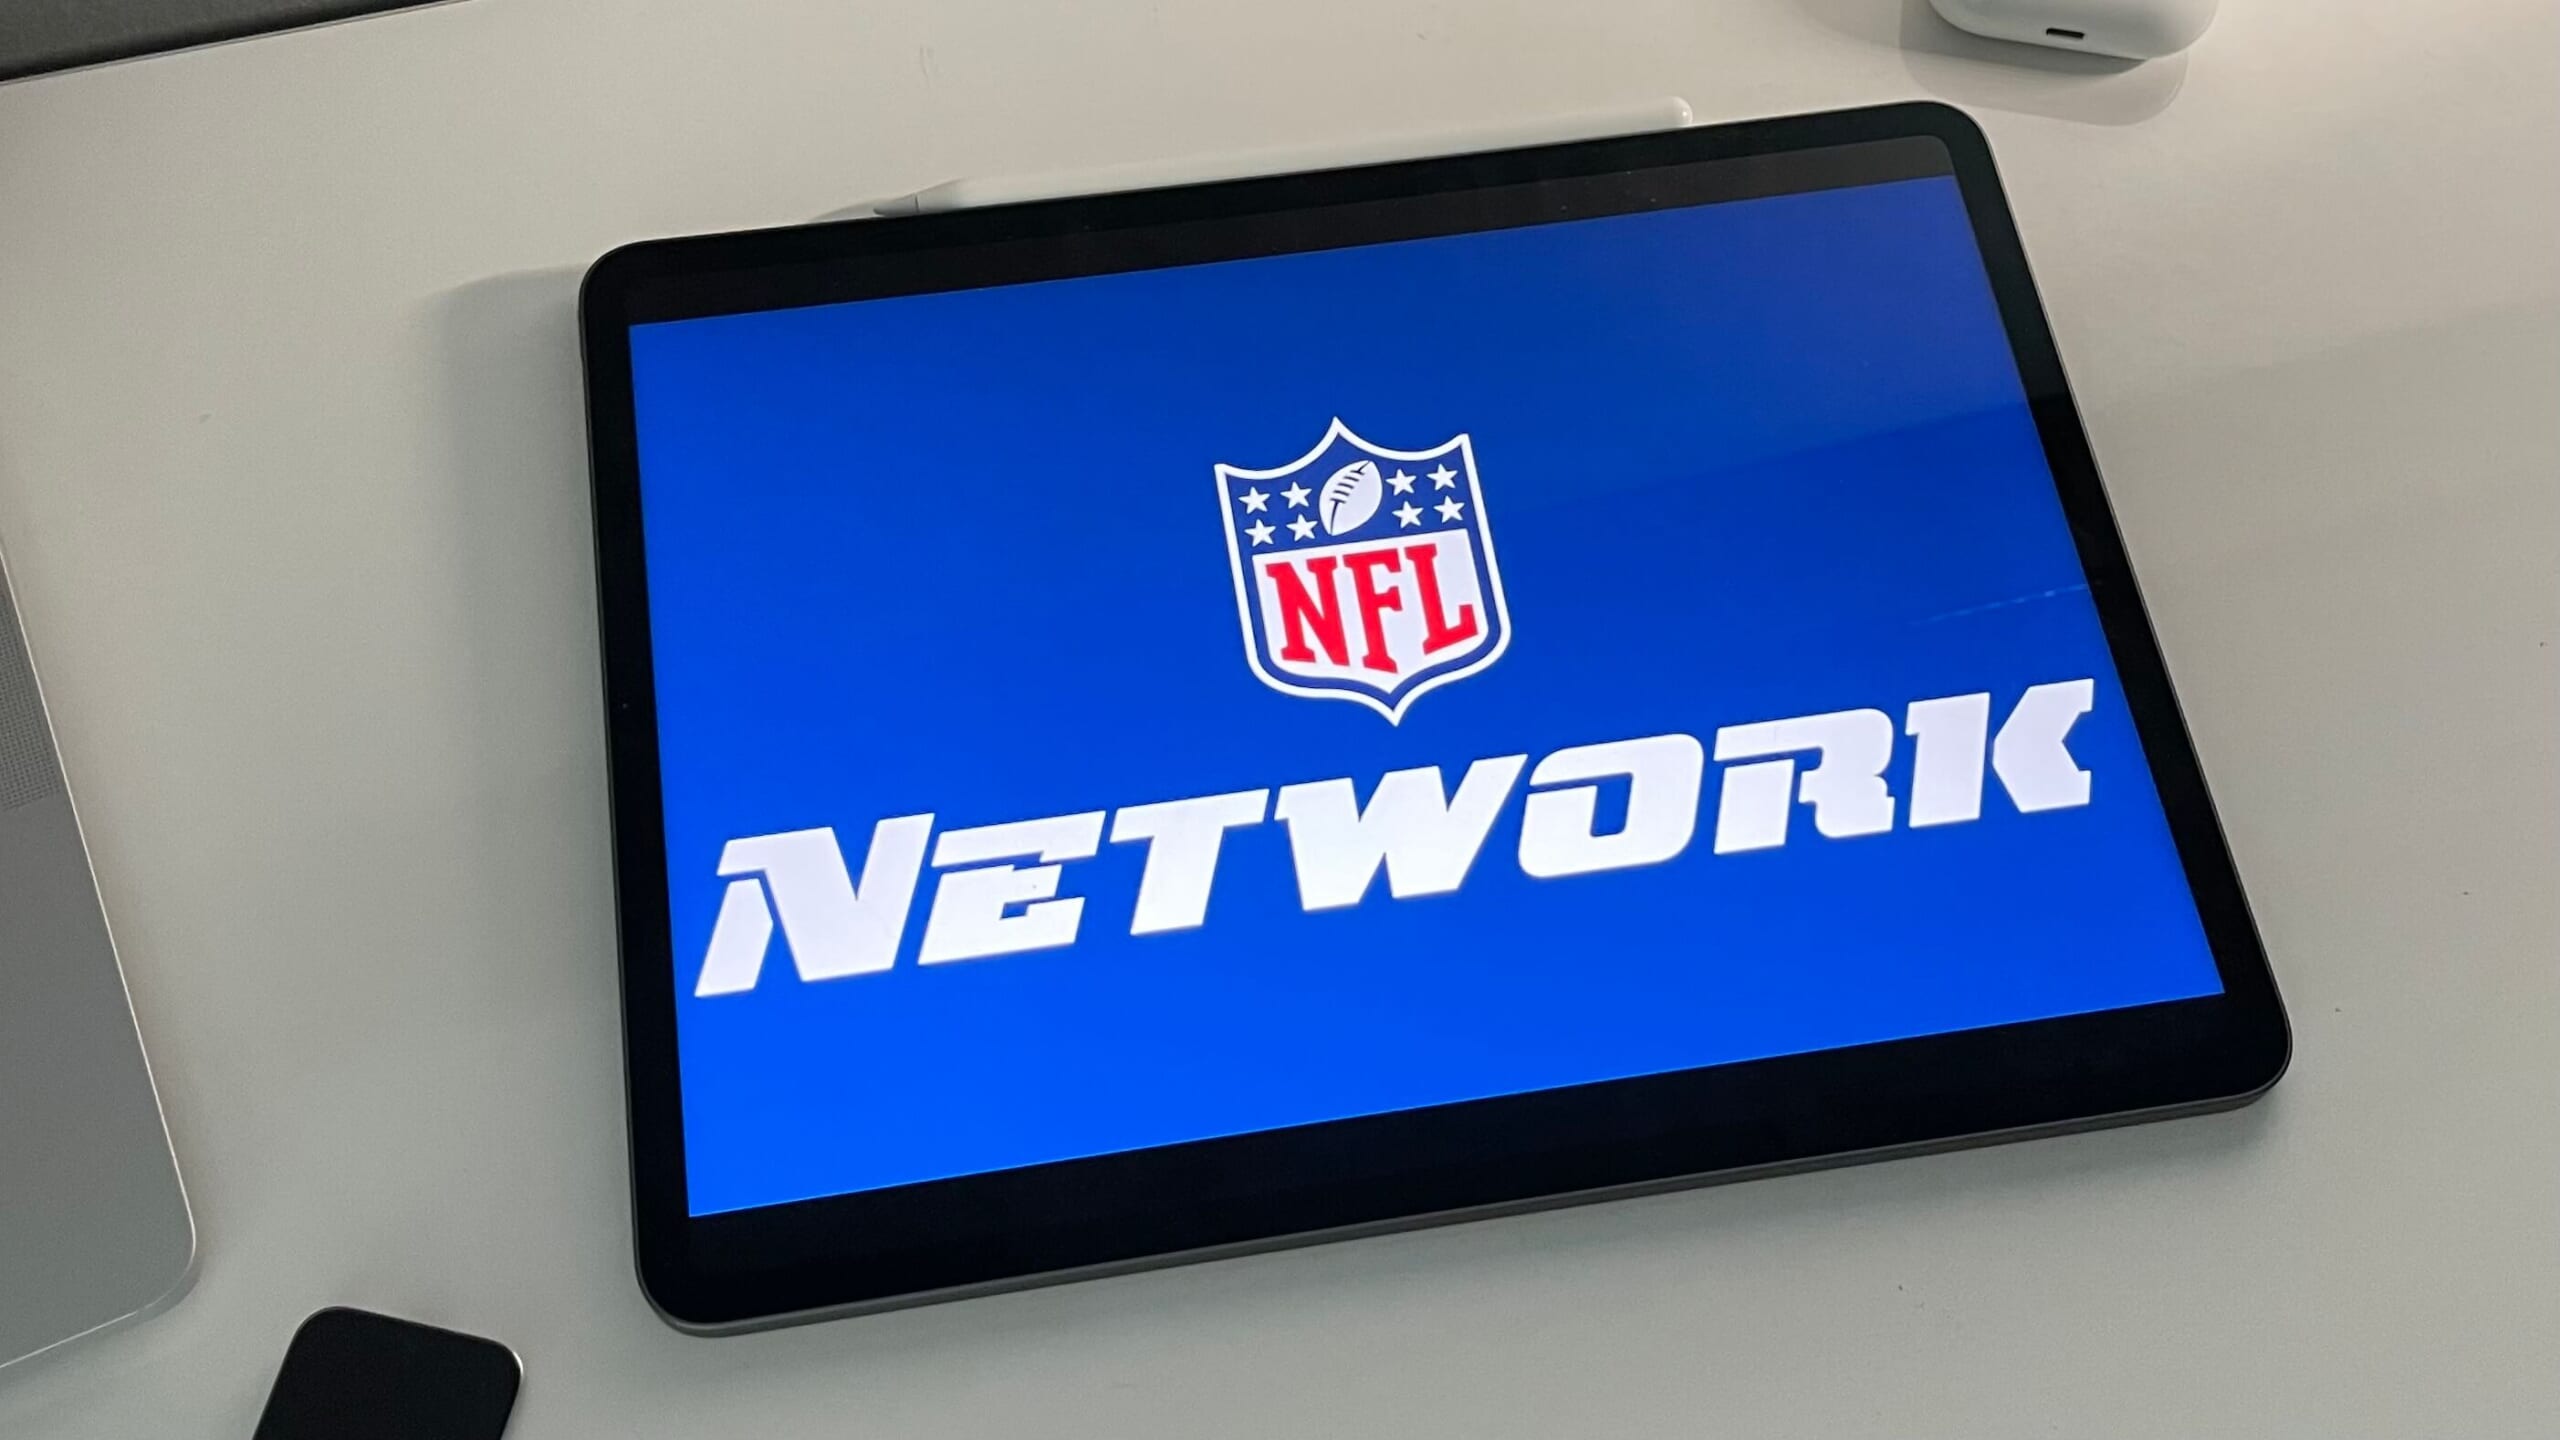 cost of nfl network on directv